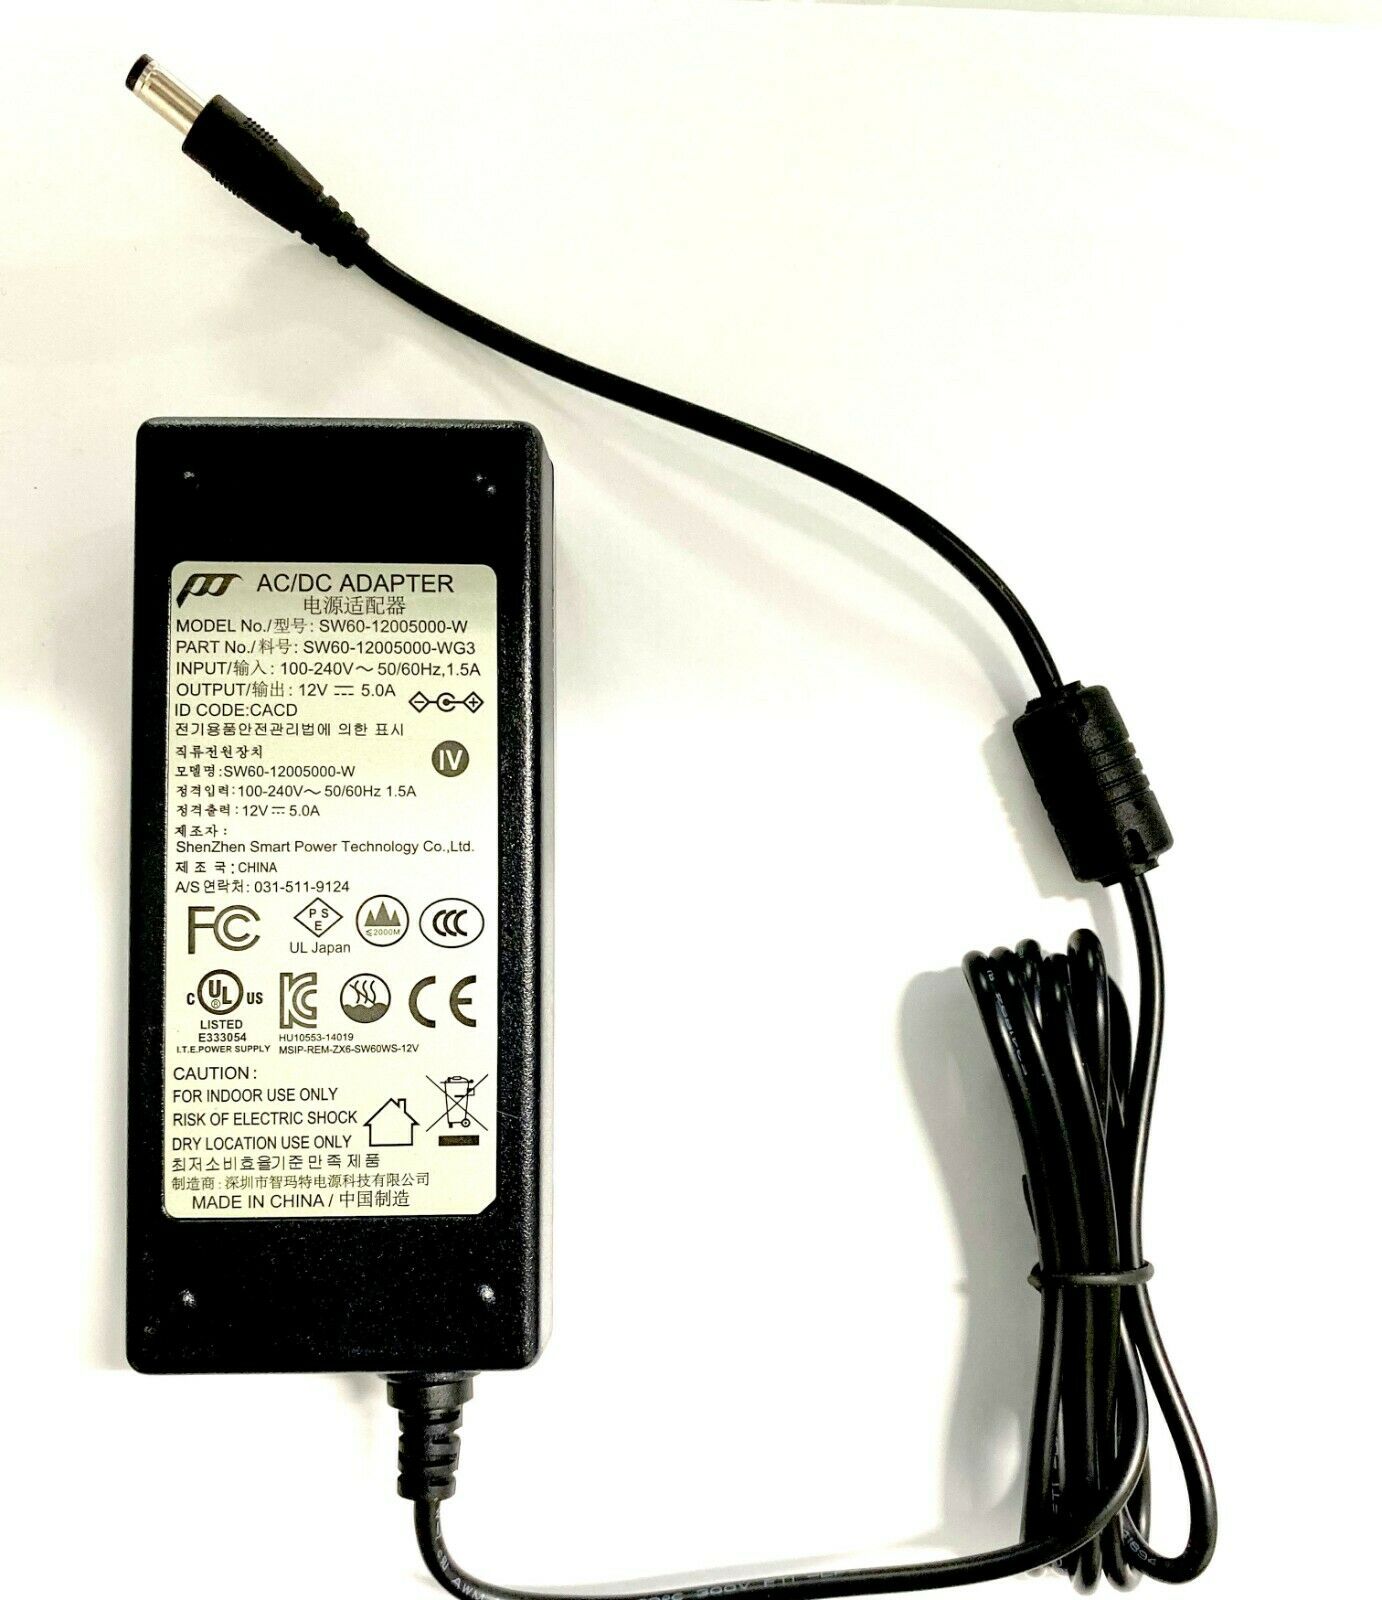 POWER-TEK AC DC Adapter Model: SW60-12005000-W MPN: SW60-12005000-WG3 Type: AC/DC Adapter Features: Powered Cable Le